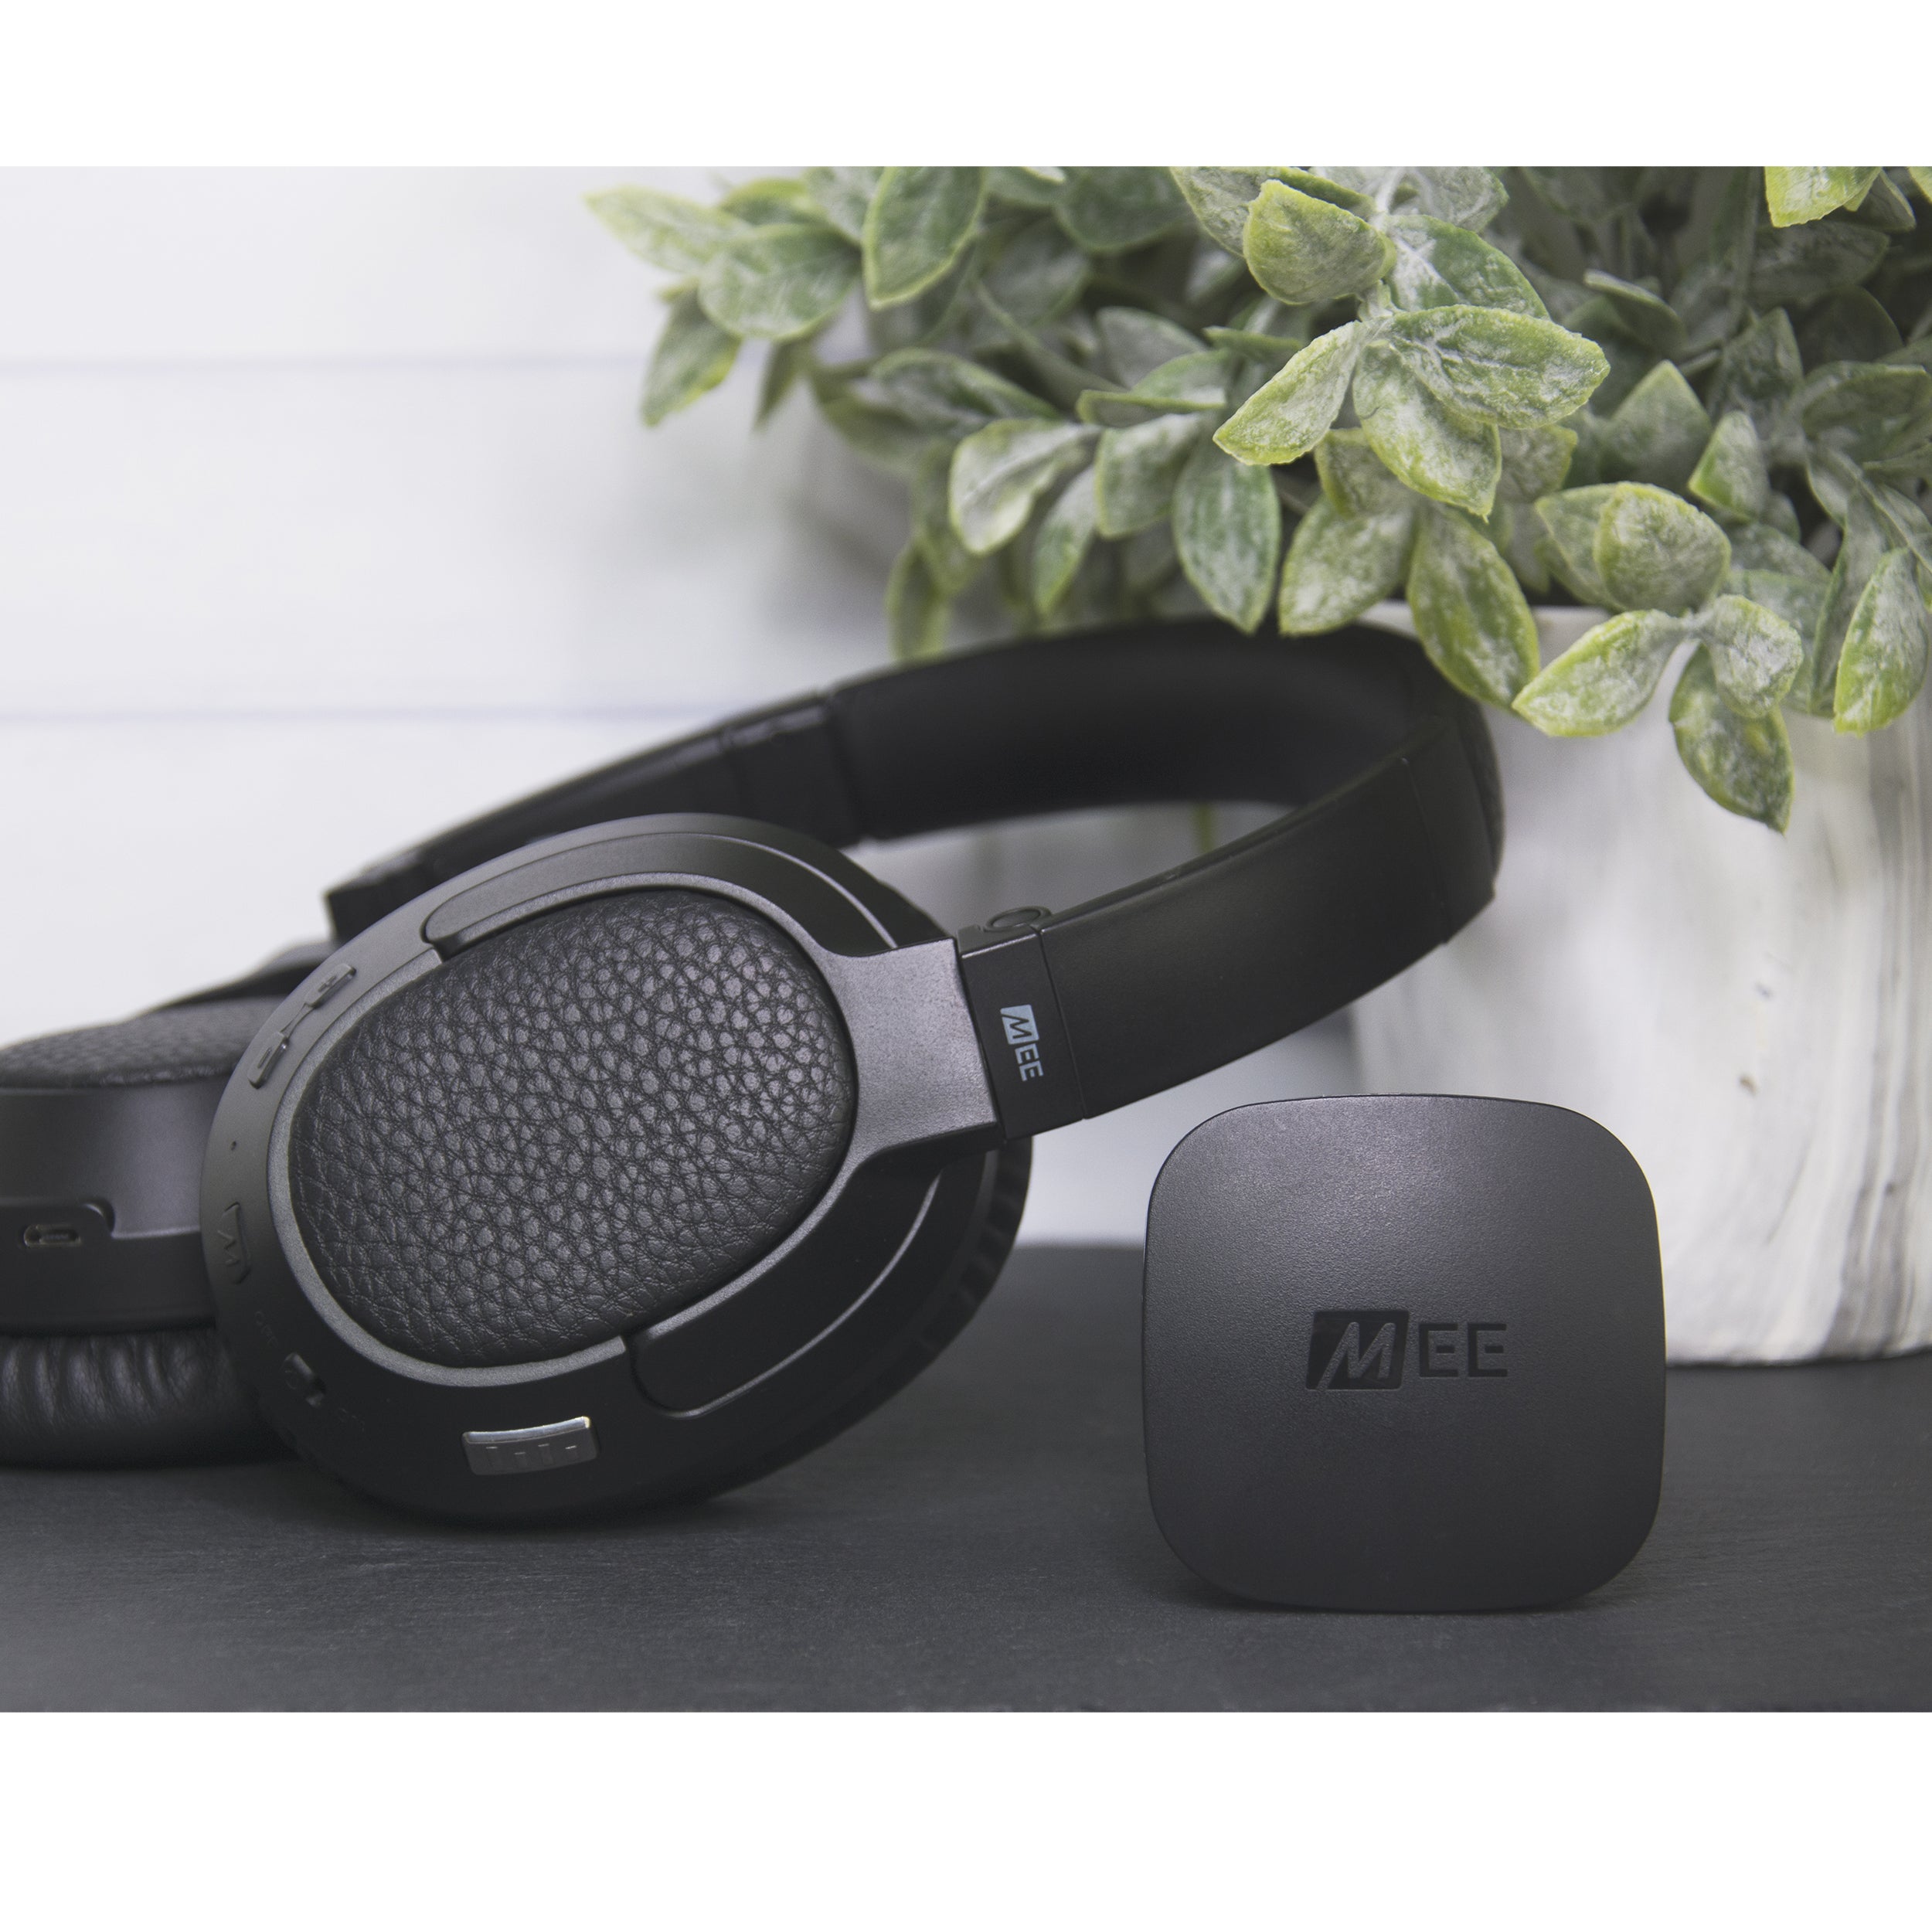 Black over-ear headphones with textured ear cups beside a small black device labeled "mee," placed on a wooden surface near a potted green plant with white background.